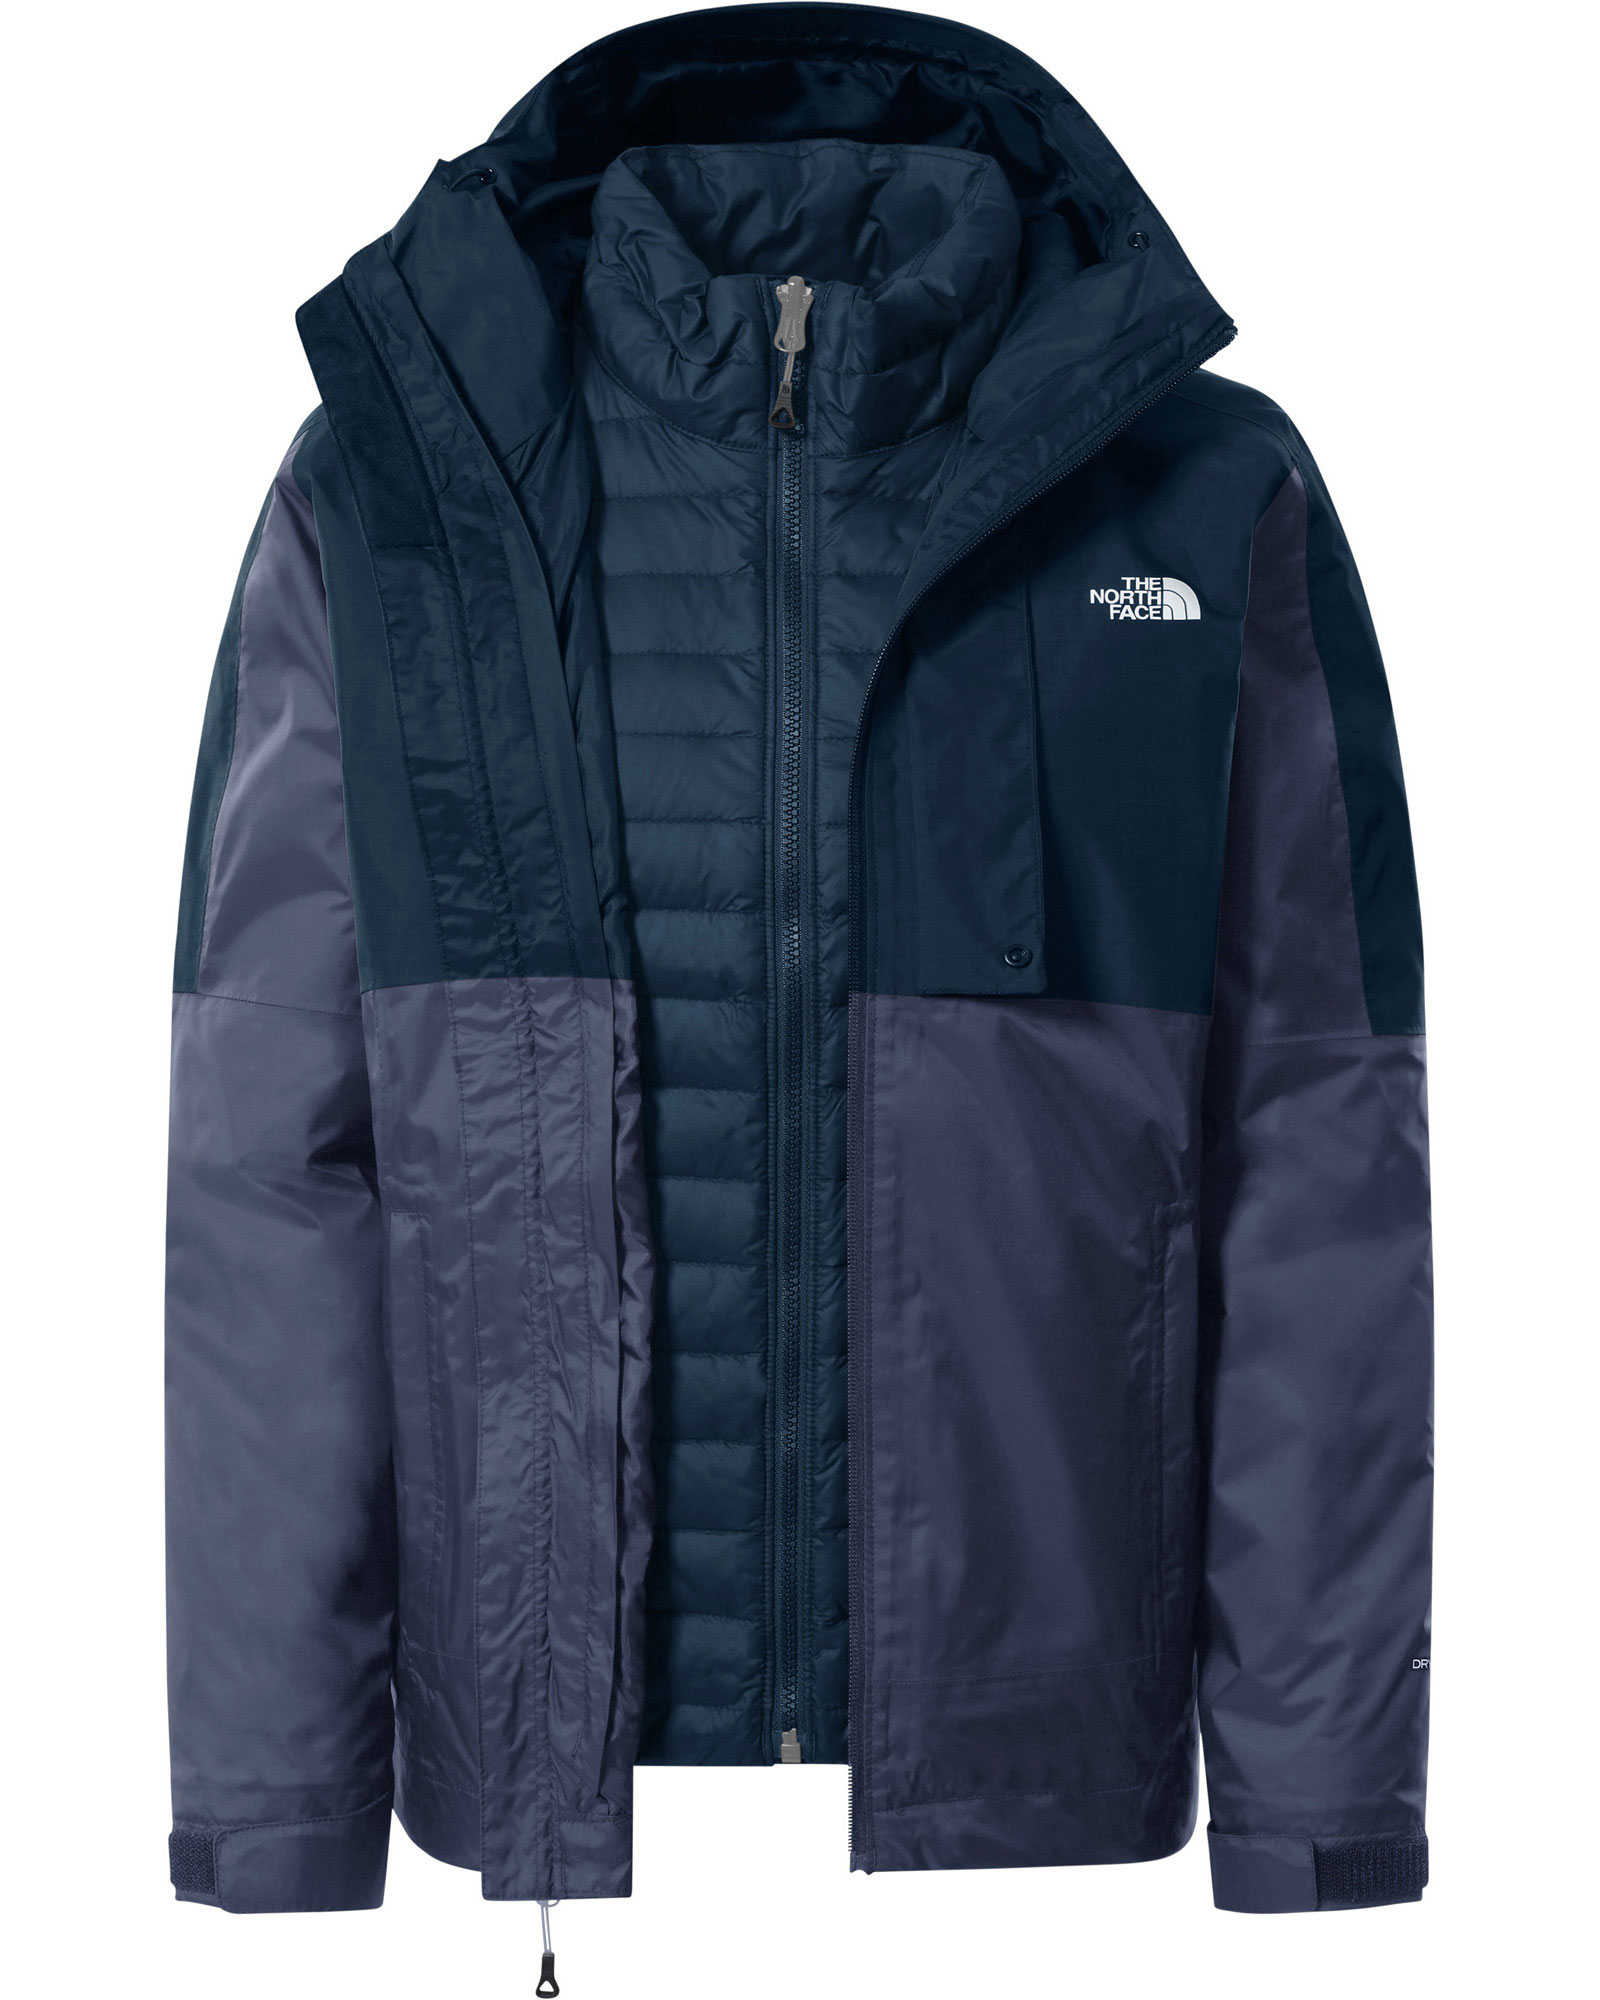 The North Face Down Insulated Triclimate Women’s Parka Jacket - Shady Blue M